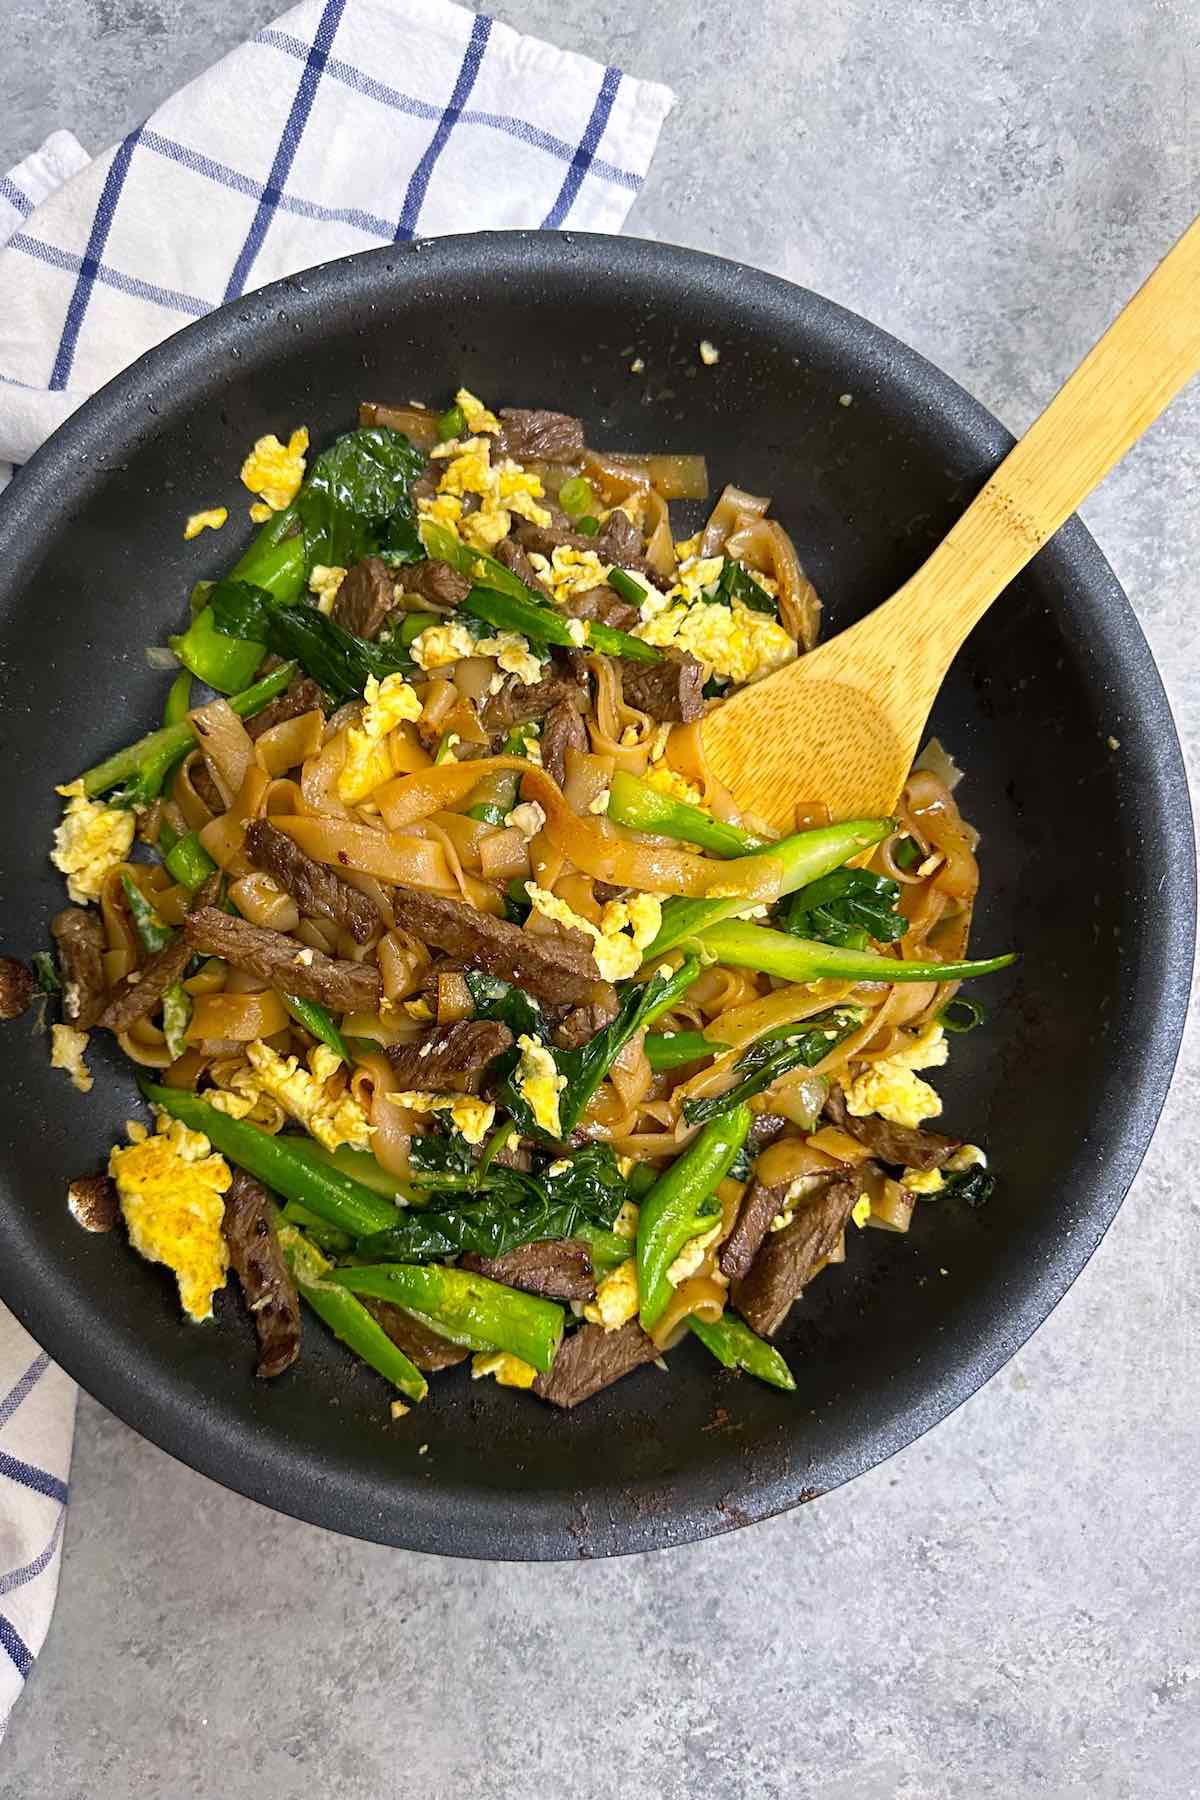 This restaurant-quality Pad See Ew is easy and comes together in under 30 minutes. Made with Thai wide rice noodles, beef, Chinese broccoli, and scrambled eggs, all tossed together in a savory and sweet Pad See Ew sauce!